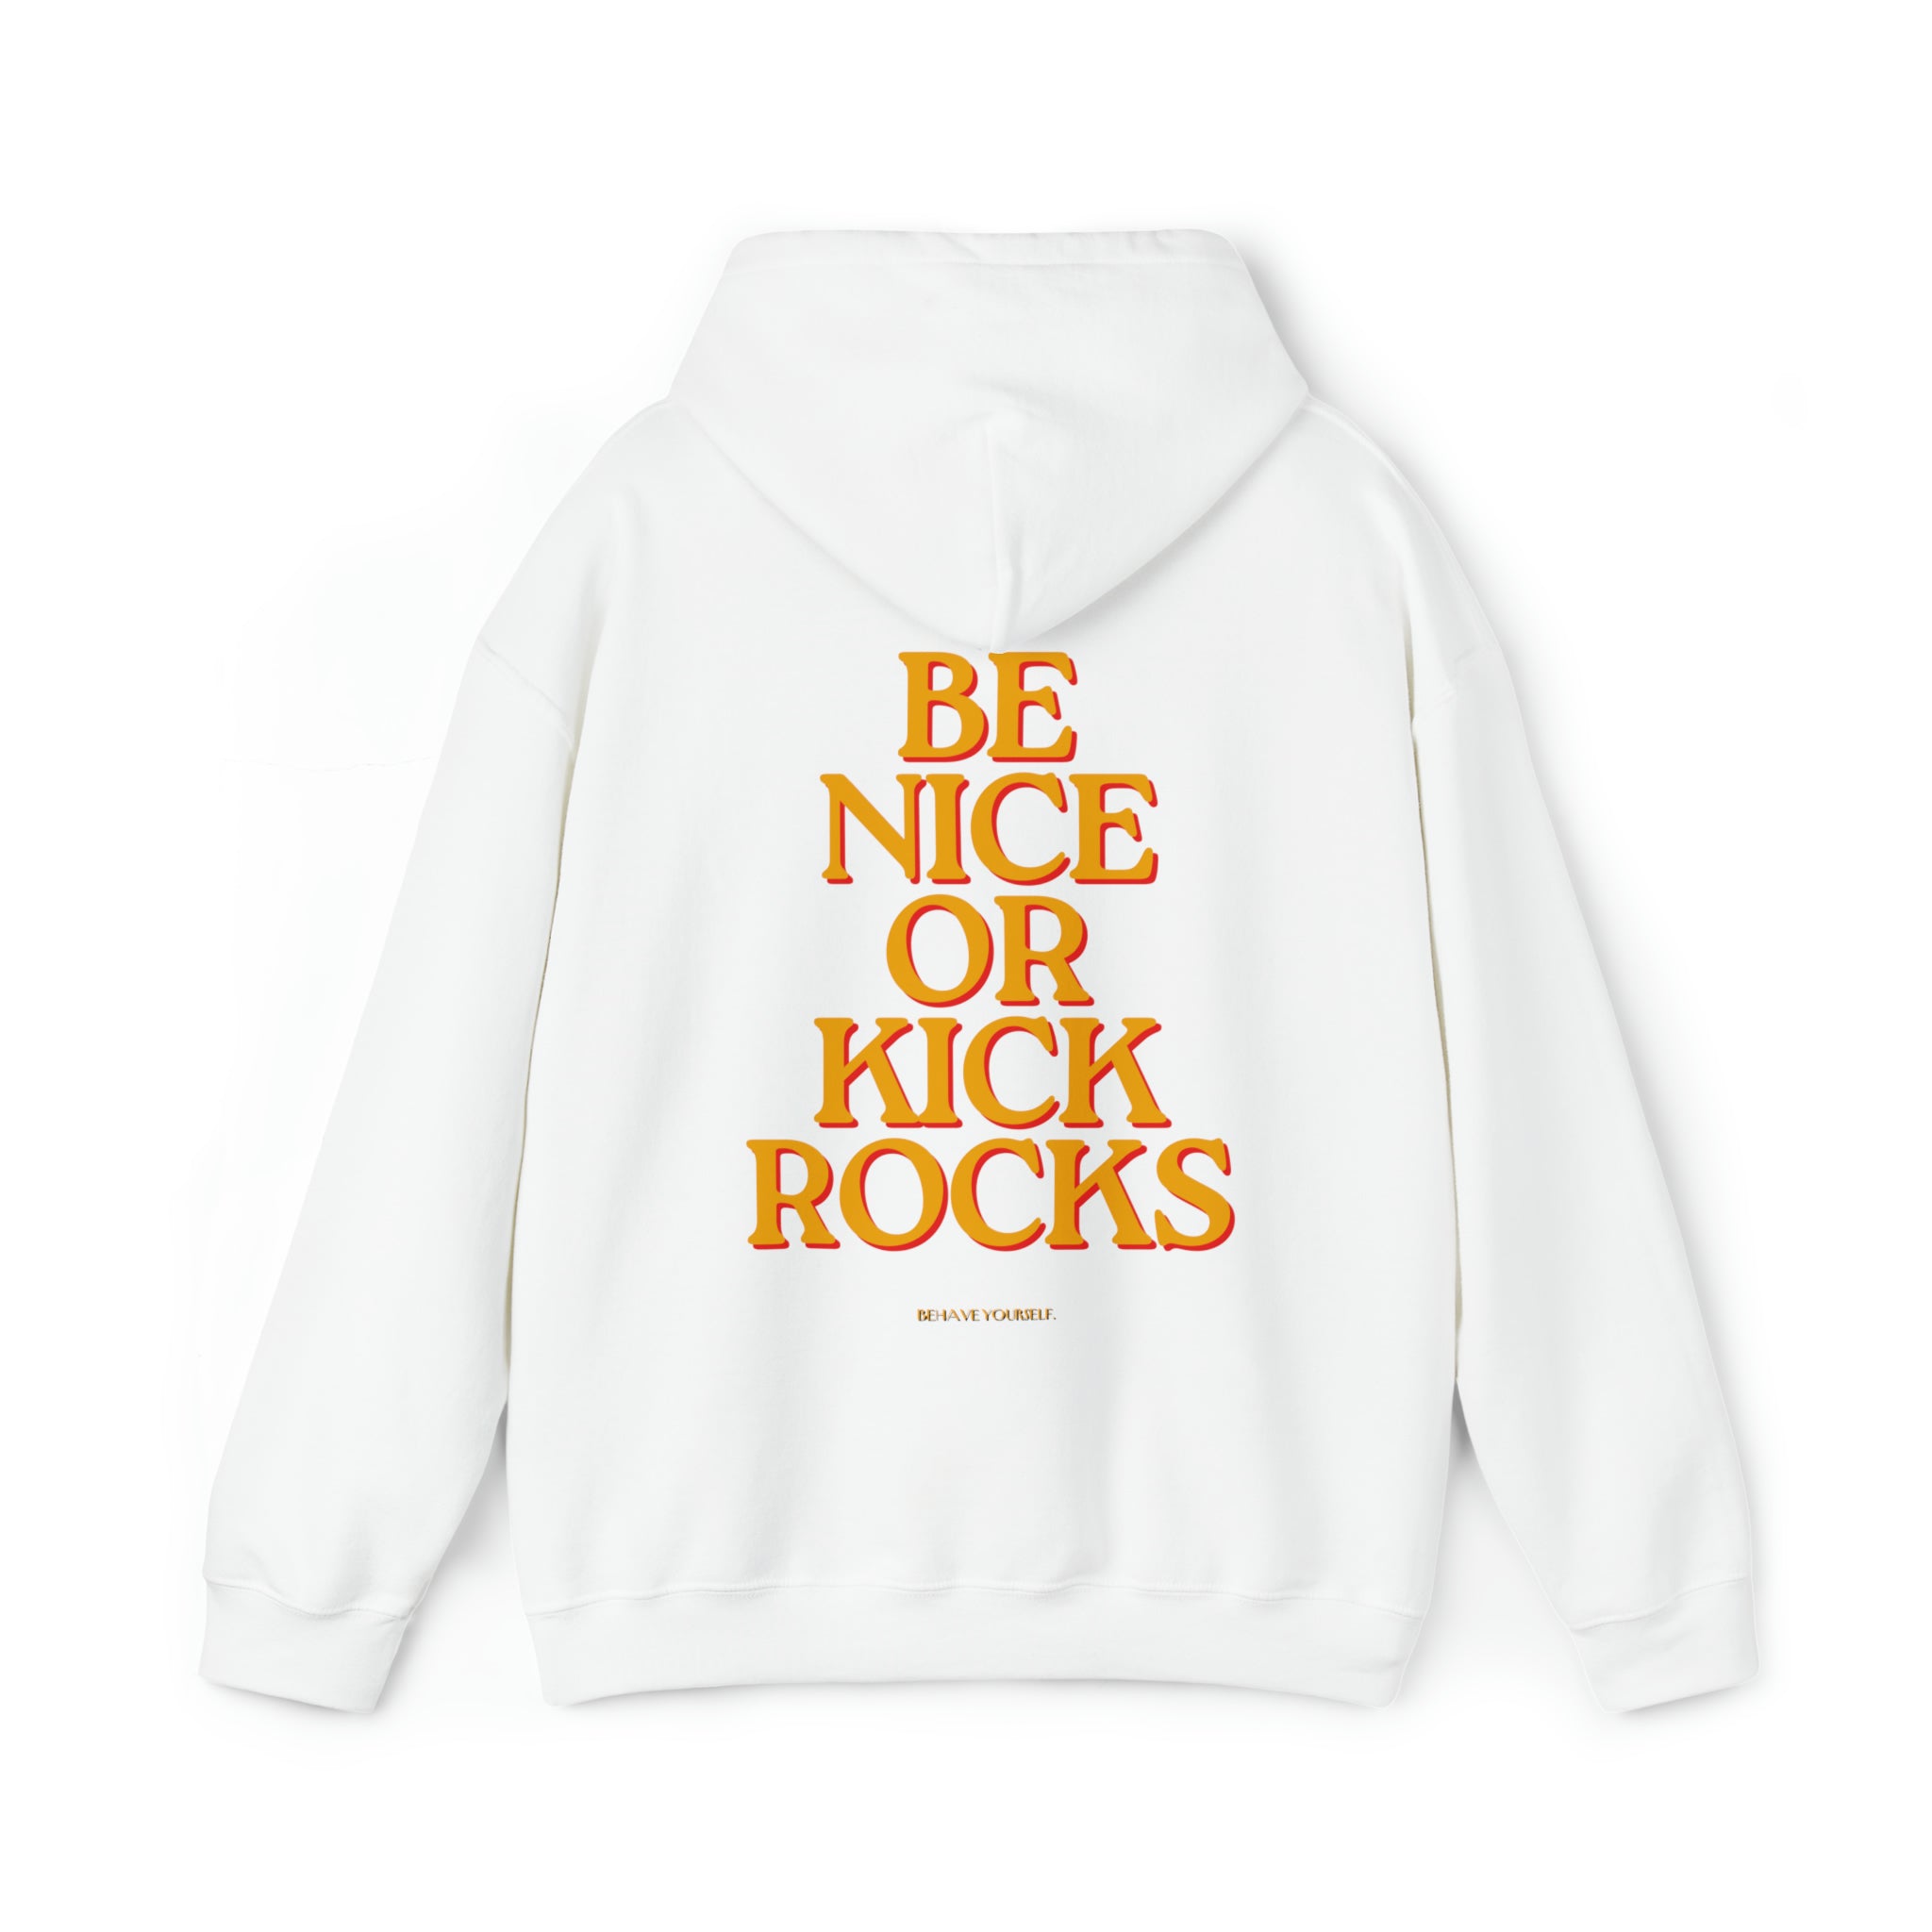 Close-Up Detail of the 'Be Nice or Kick Rocks' Design